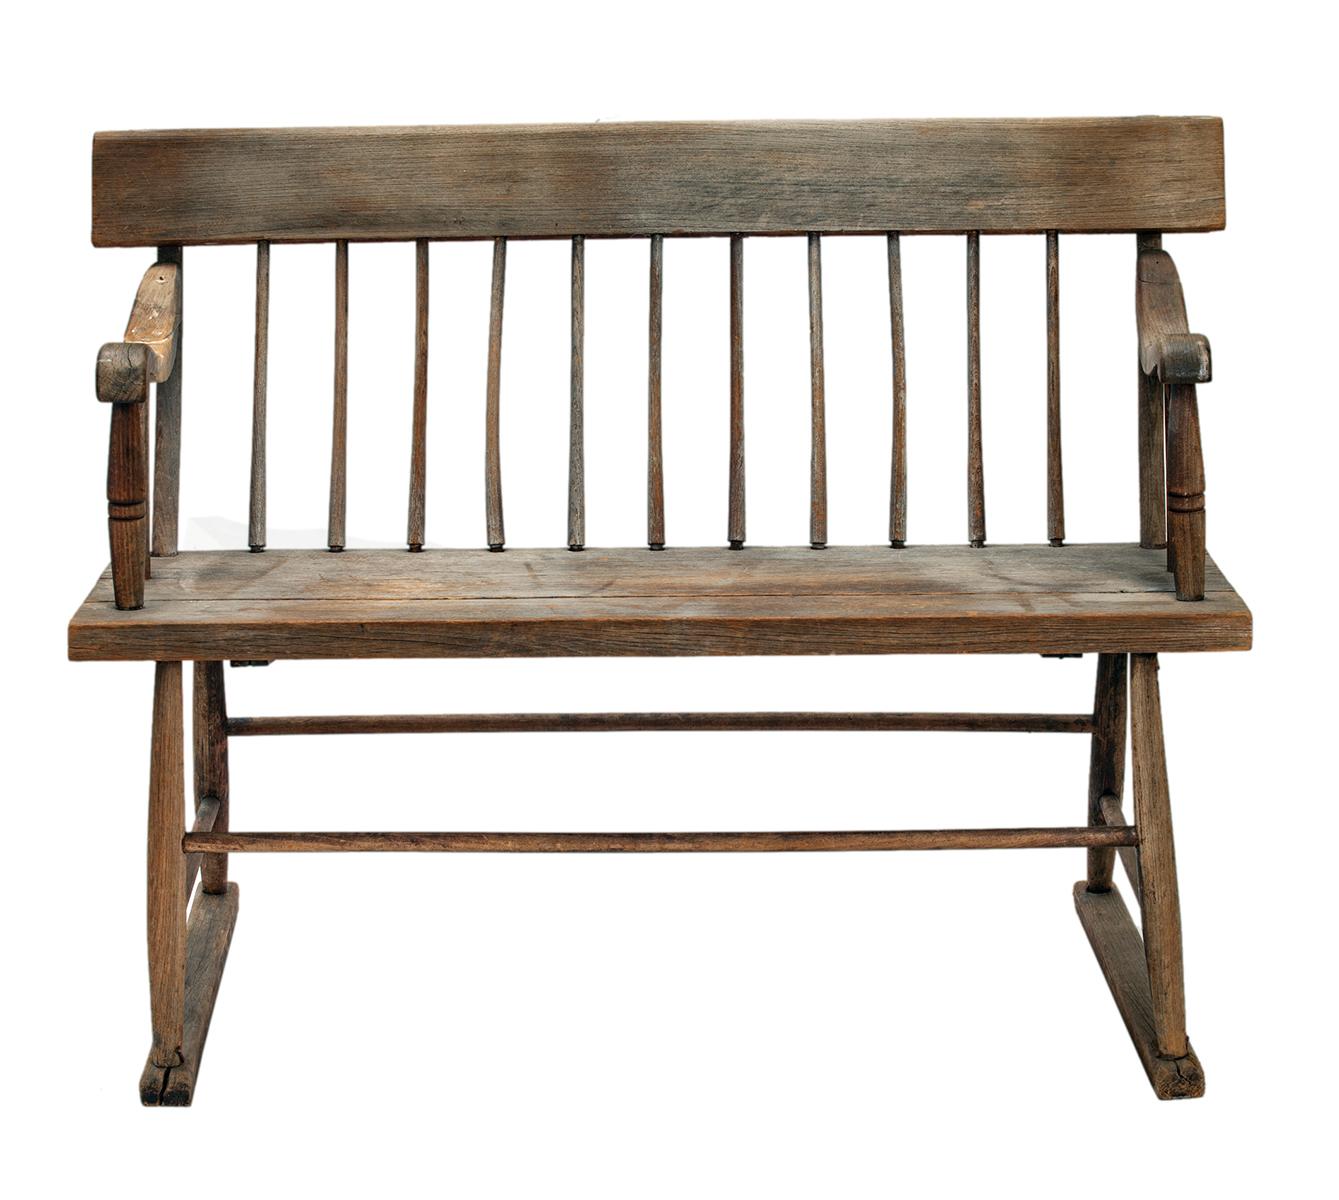 Rustic Americana, a bench with spindle back. A seat comfortable for two adults. The arms are gracefully curved and placed just where it’s needed, 27” from the floor.